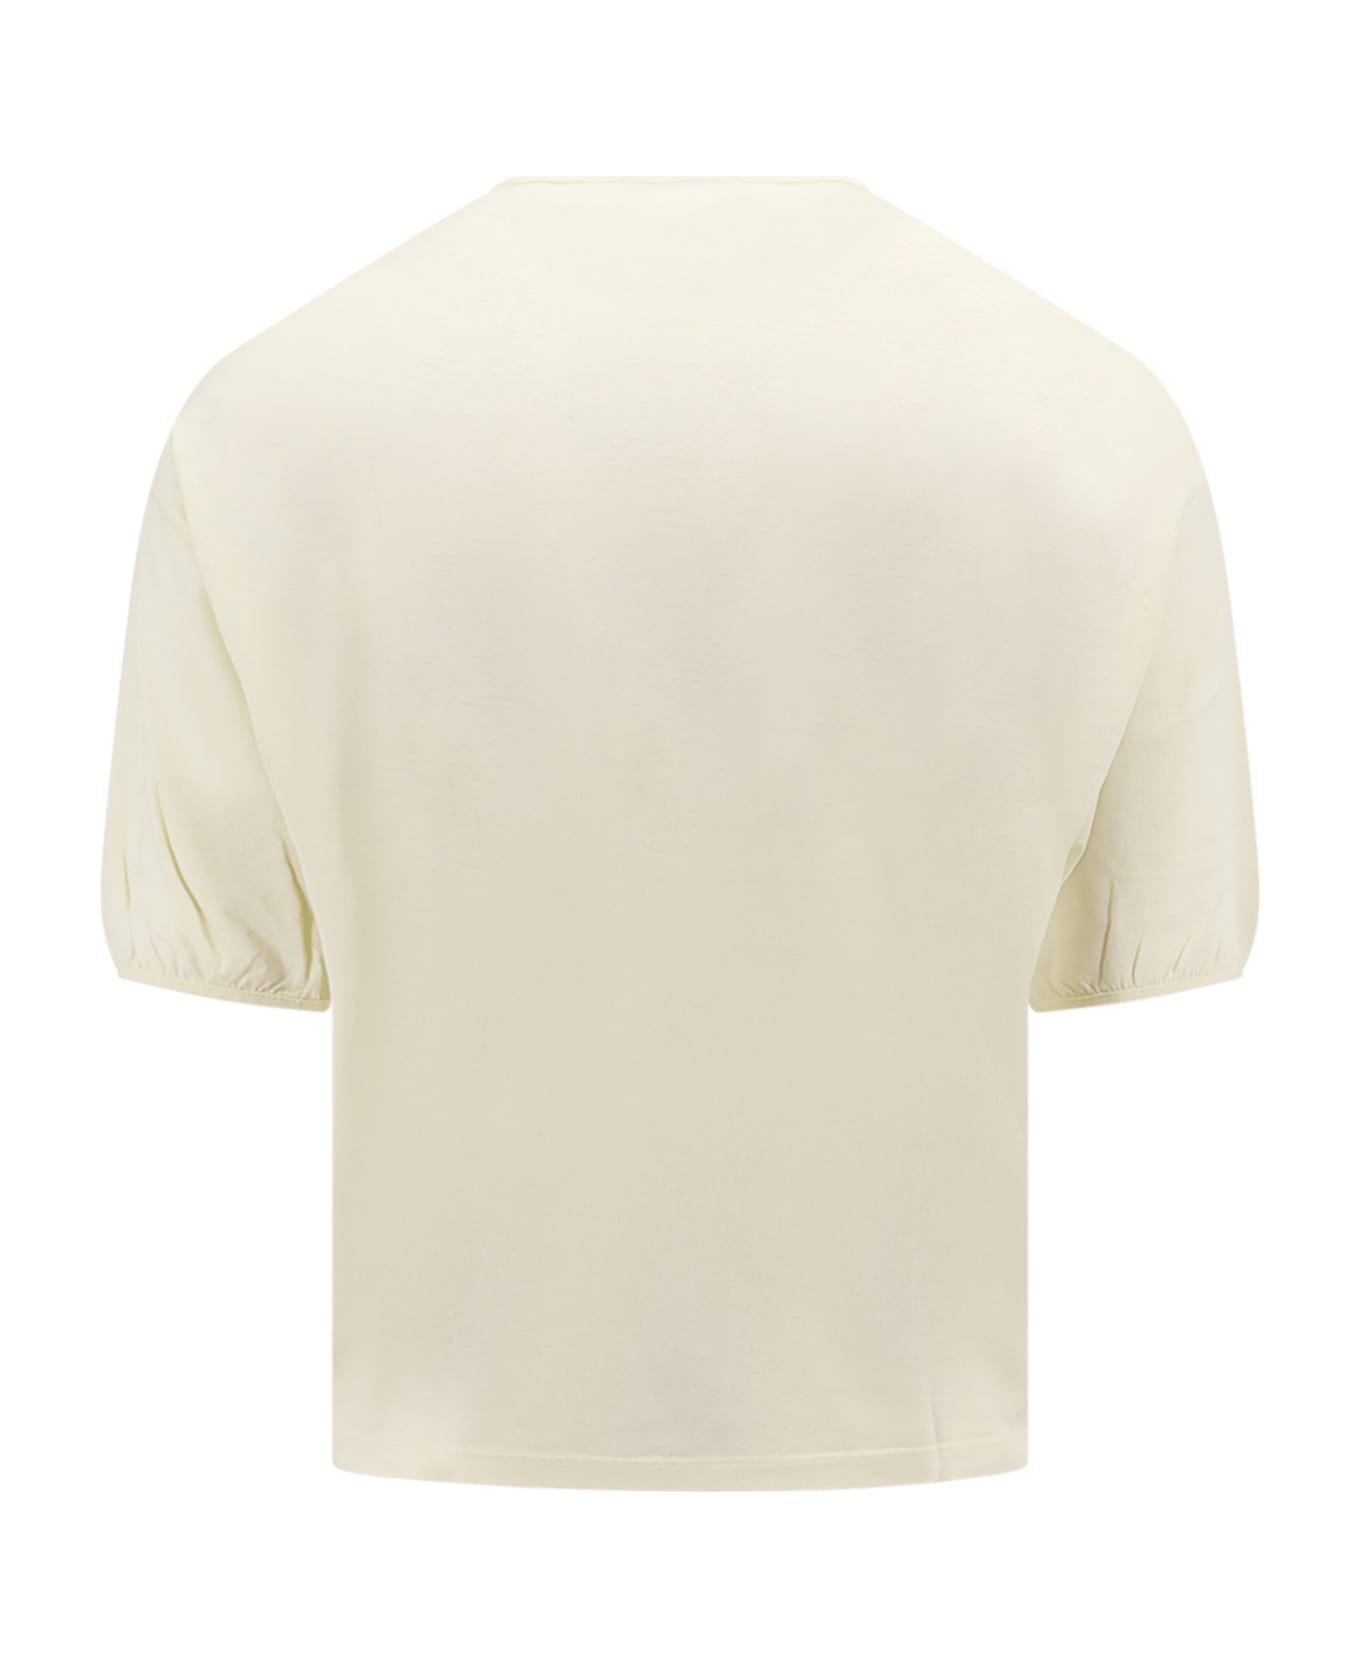 Lemaire T-shirt - Yellow シャツ